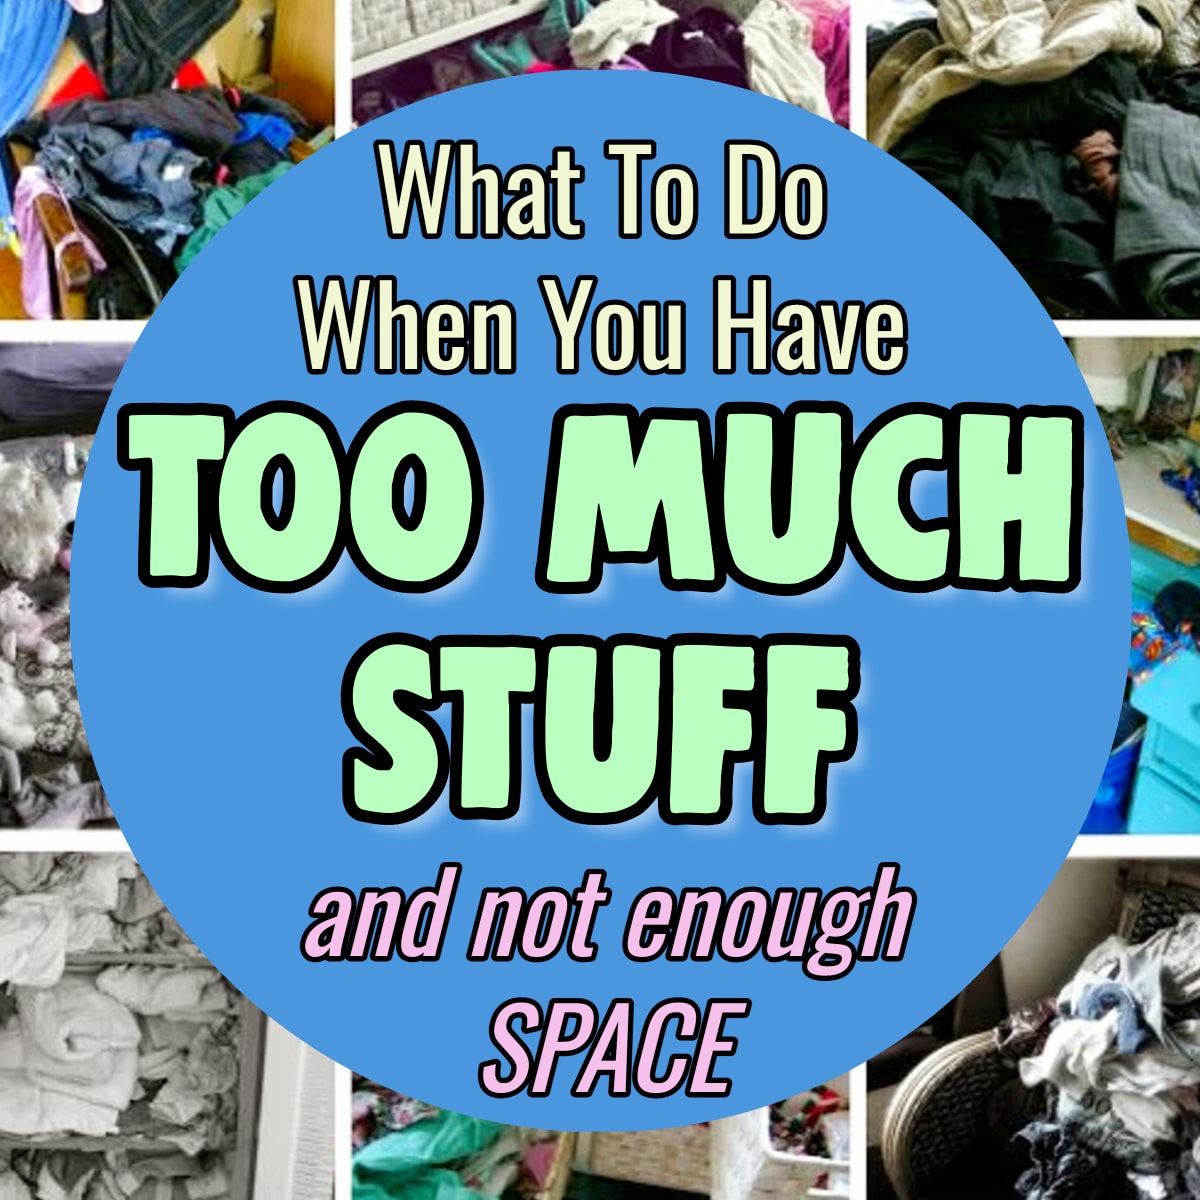 Overwhelmed with too much STUFF? Here's how to simplify life and get rid of stuff with the four box method decluttering strategy or my 7 step action plan to get rid of clutter, junk and stuff that overwhelms you.